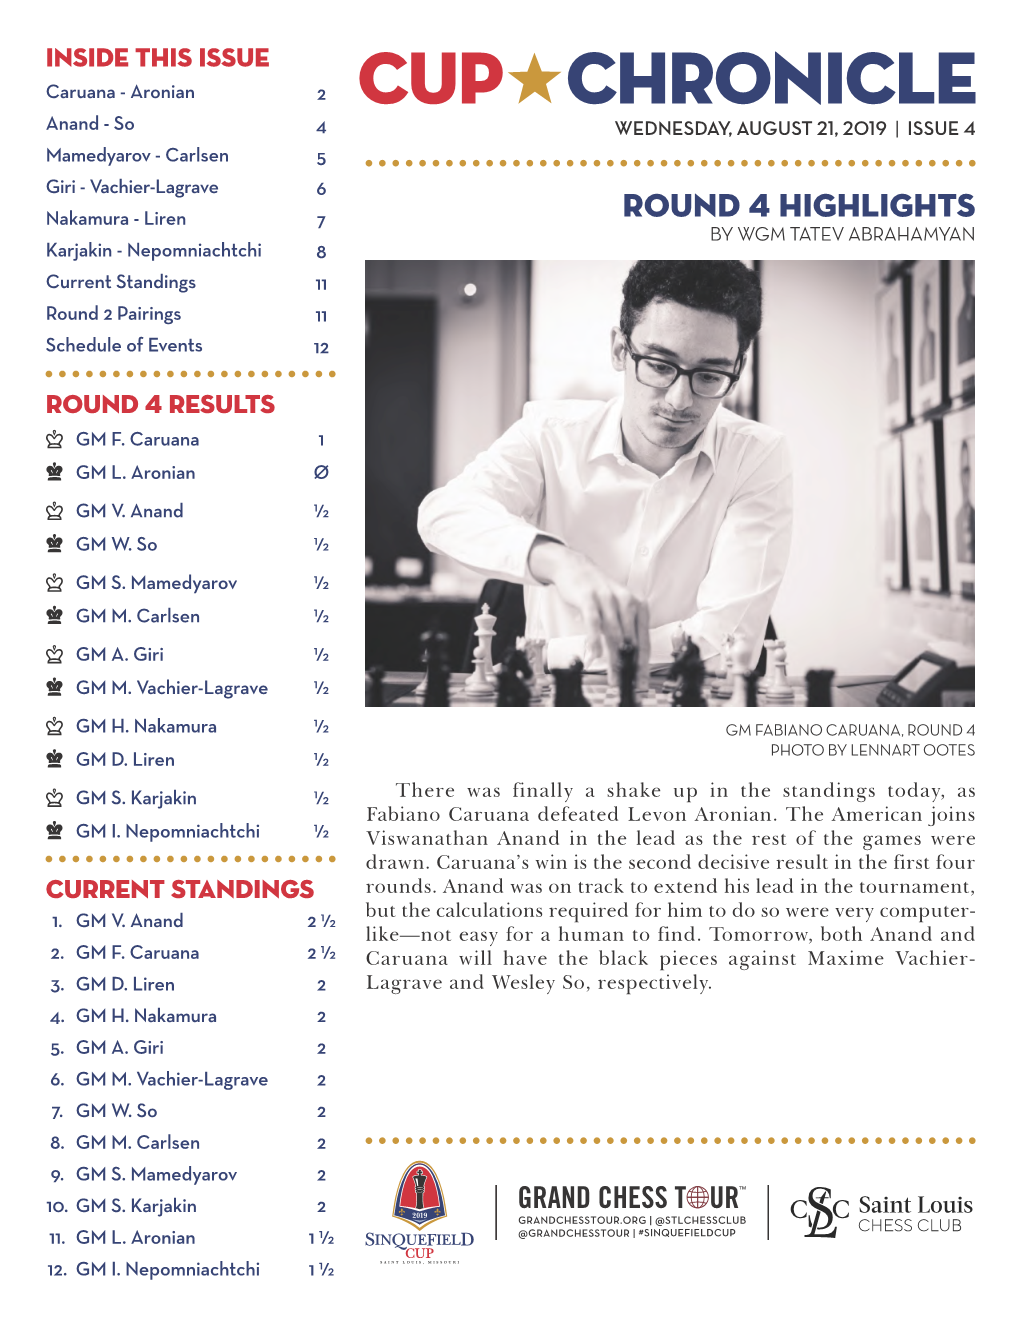 ROUND 4 HIGHLIGHTS by WGM TATEV ABRAHAMYAN Karjakin - Nepomniachtchi 8 Current Standings 11 Round 2 Pairings 11 Schedule of Events 12